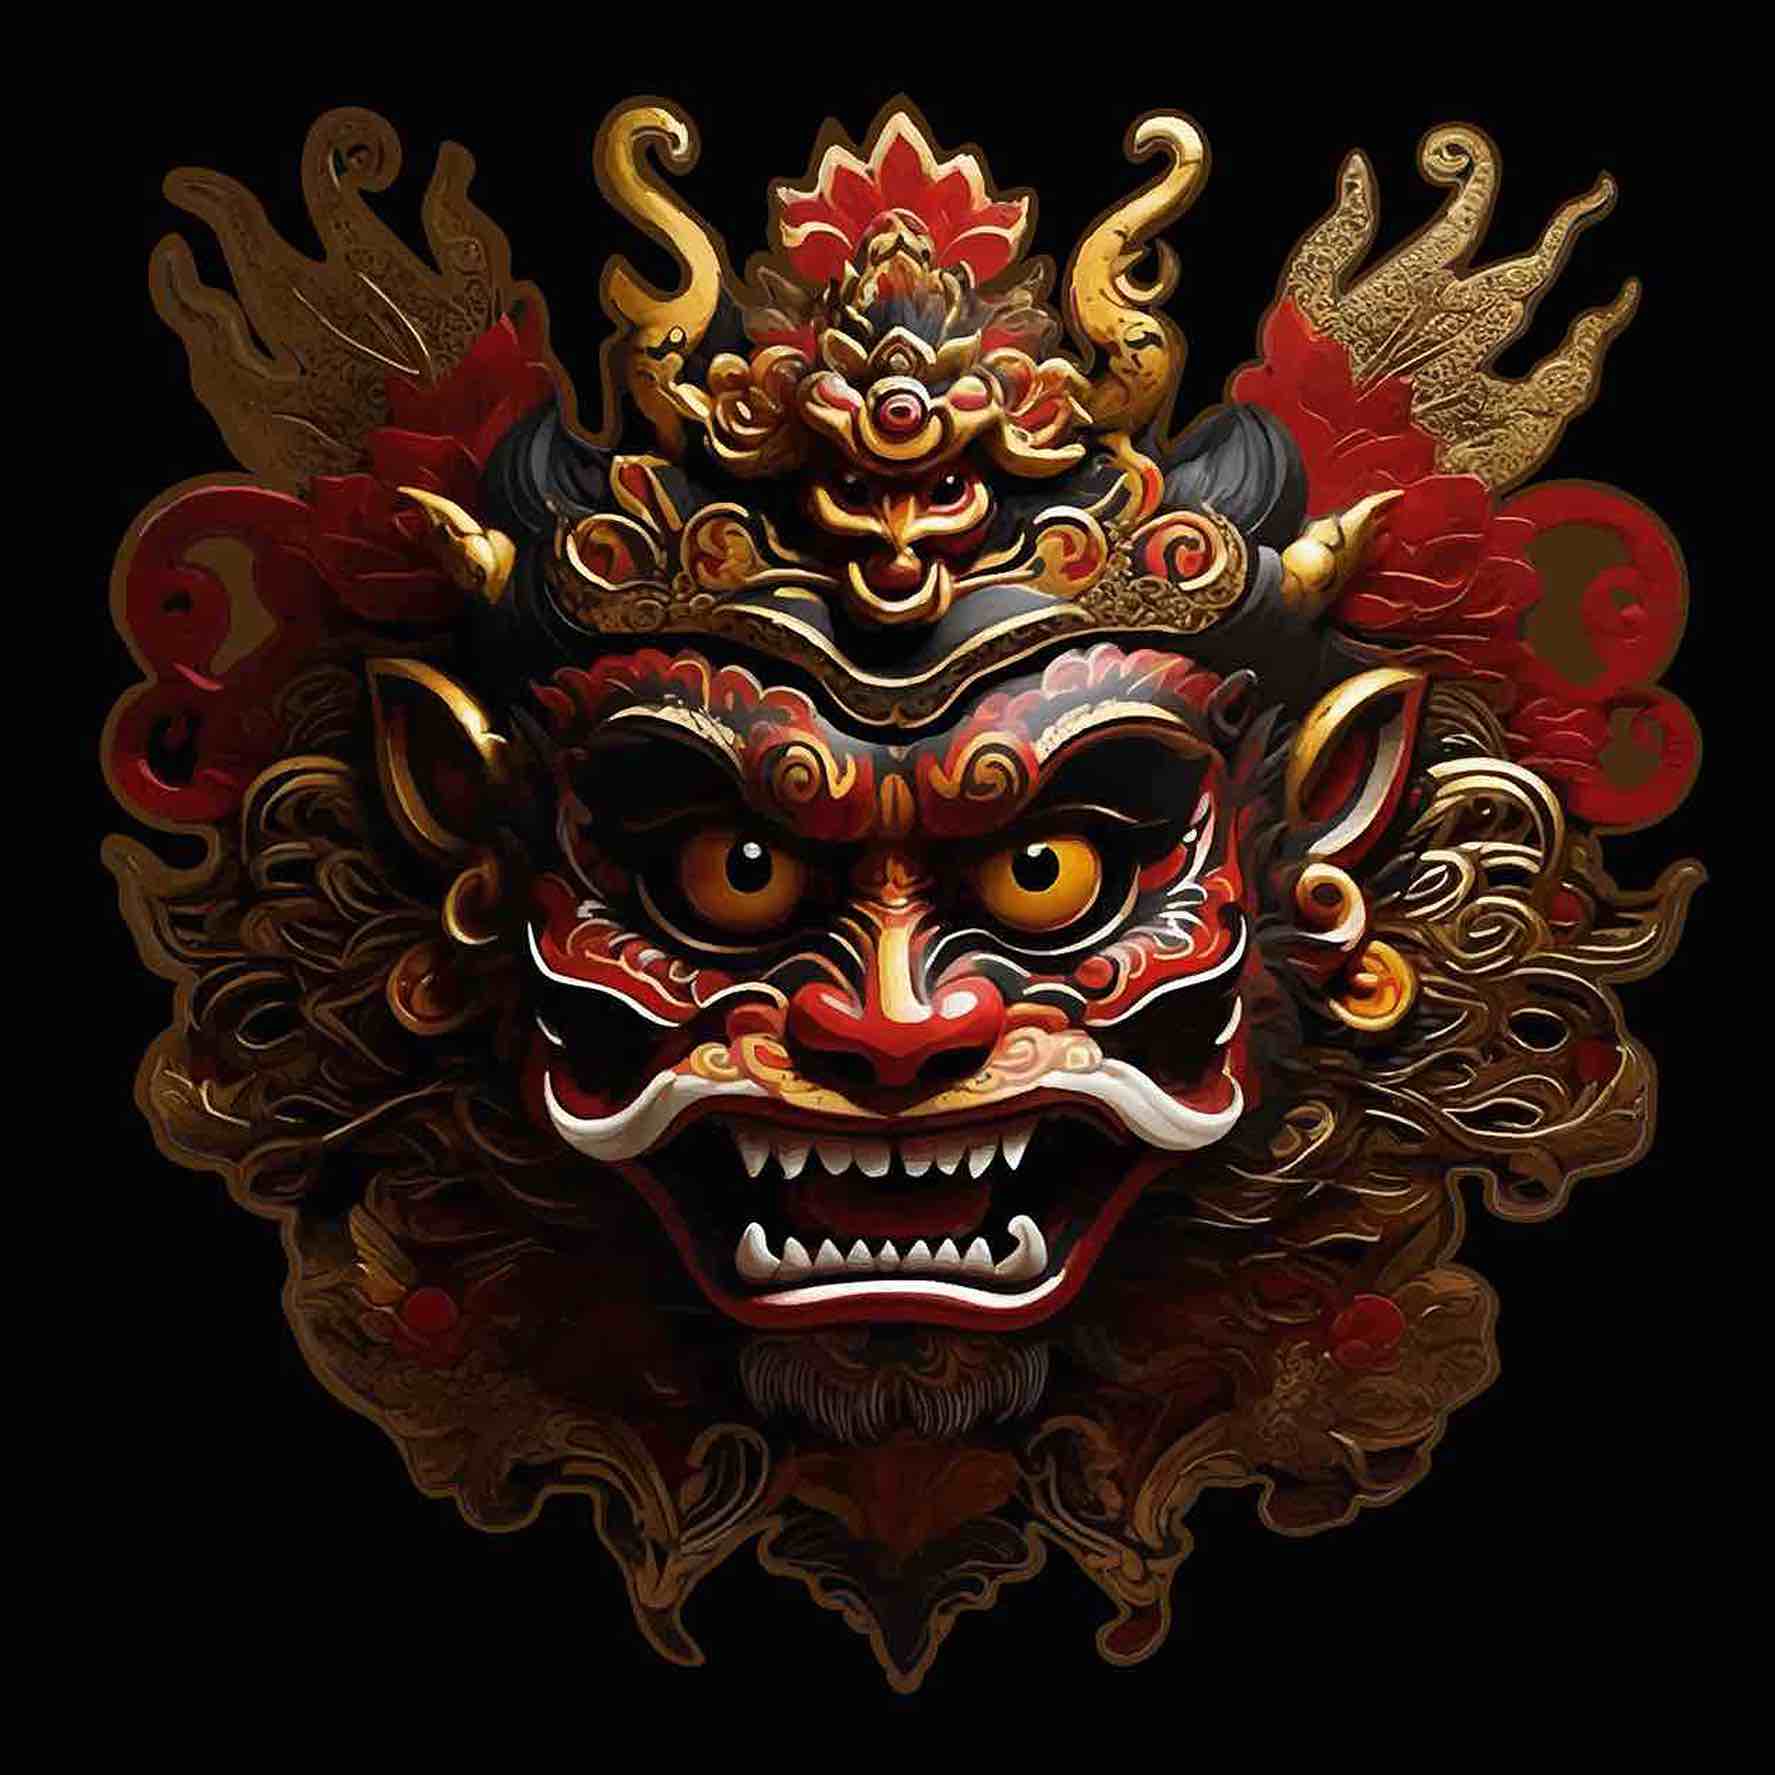 Balinese Lion Dance: A Collection of Intricate Barong Masks Suitable for Fashion and Art Lovers - only 10$ preview image.